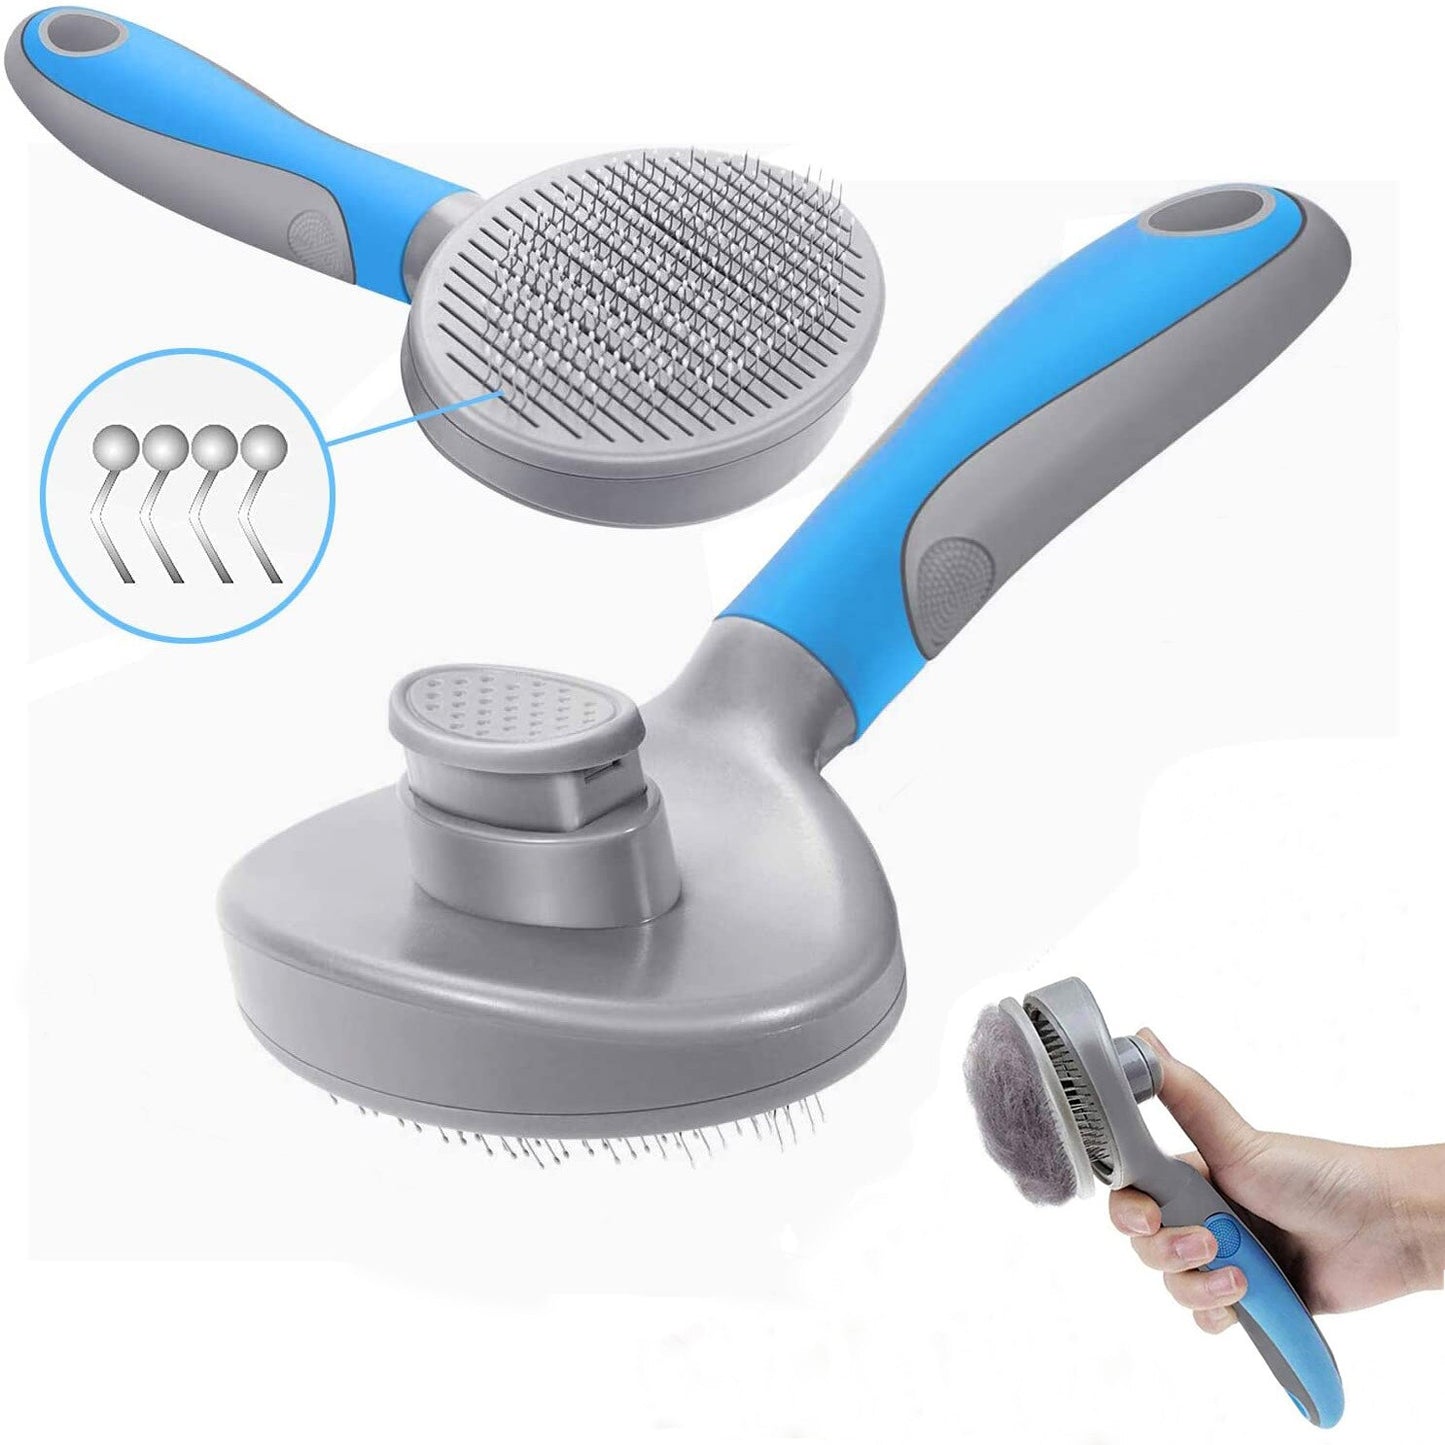 Pets Grooming Brush for Dog Long Hair Removes Pet Cat Hair Shedding Comb Puppy Slicker Brush